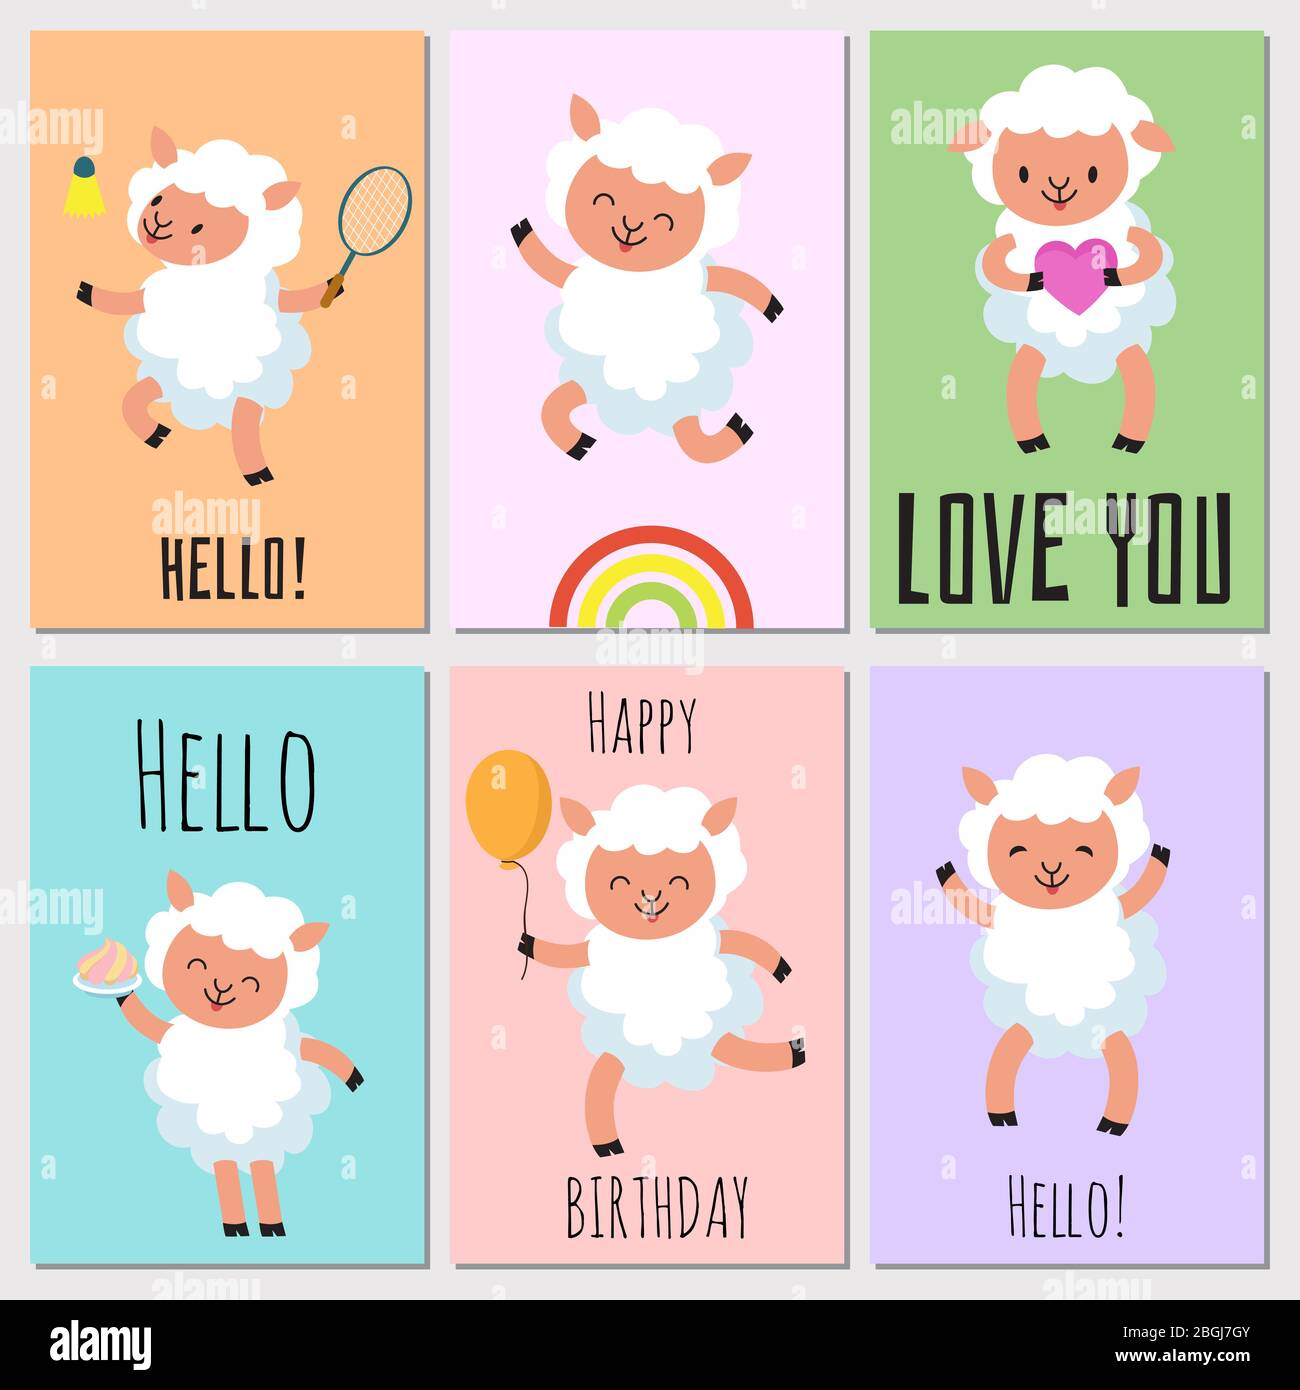 Happy birthday, love you and hello cards with cute cartoon baby sheep. Vector illustration Stock Vector